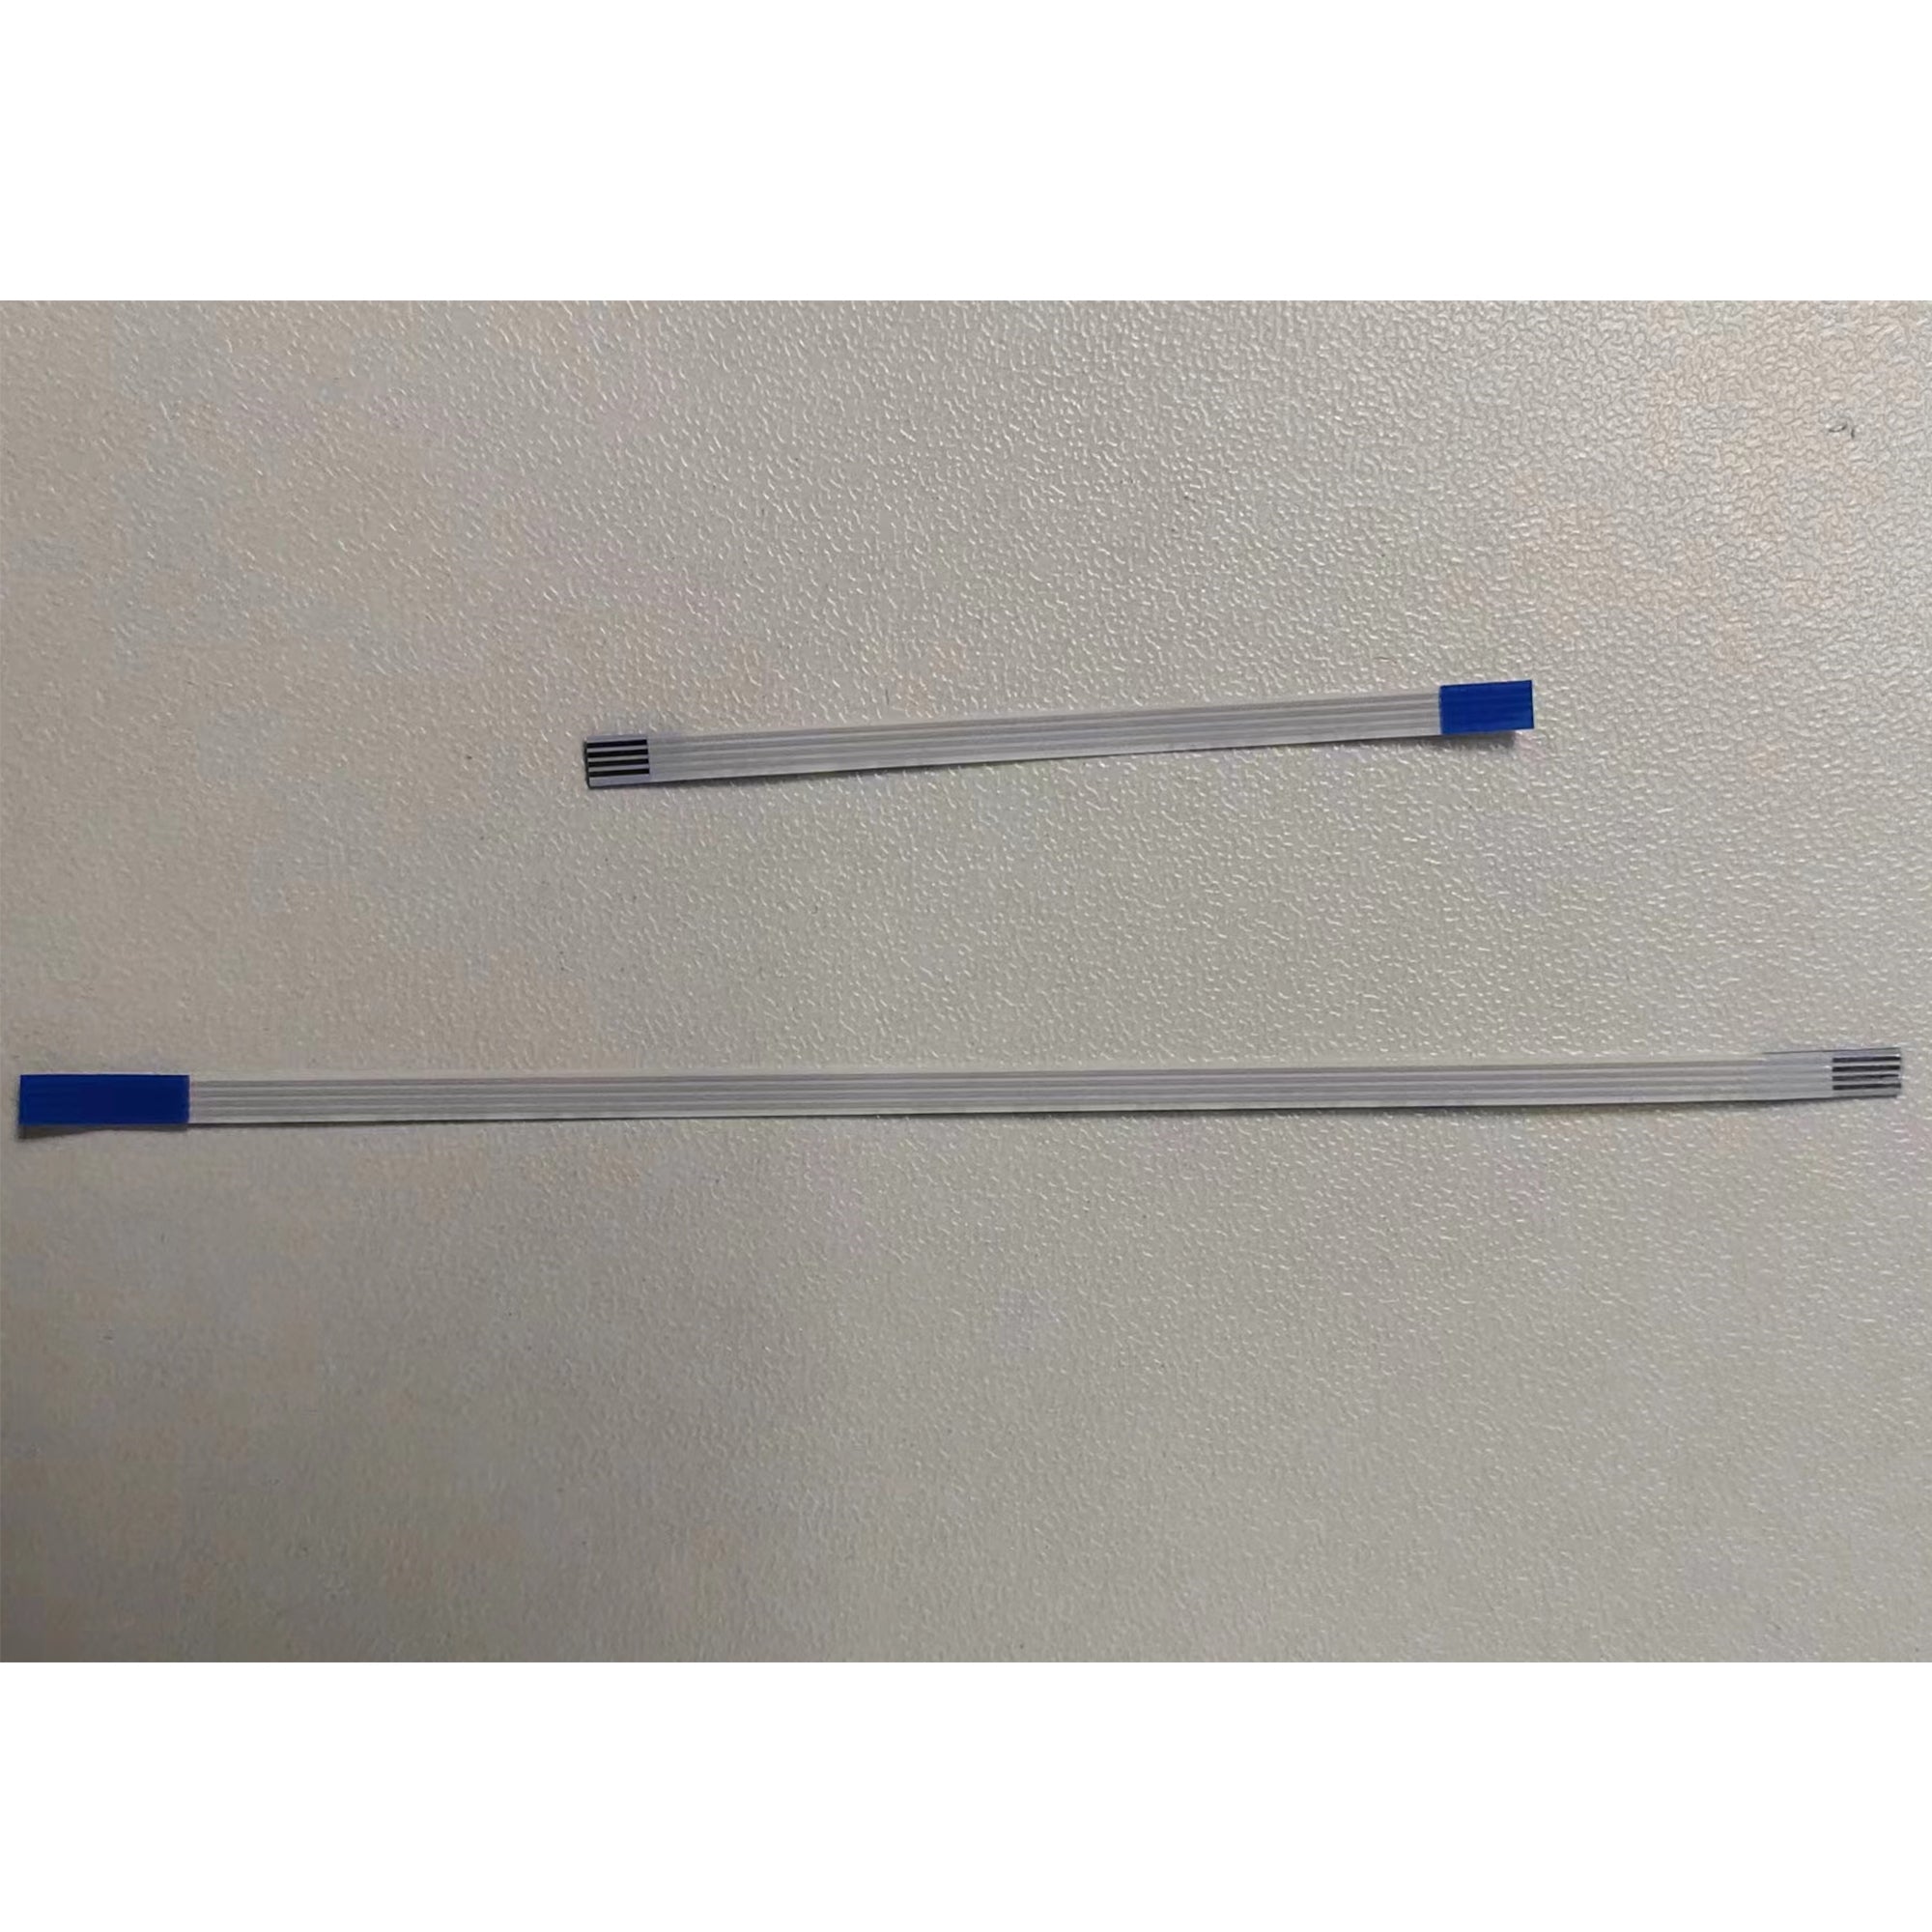 [EXTRA] HOPE75/BUBBLE75 RIBBON CABLE (FREE SHIPPING)